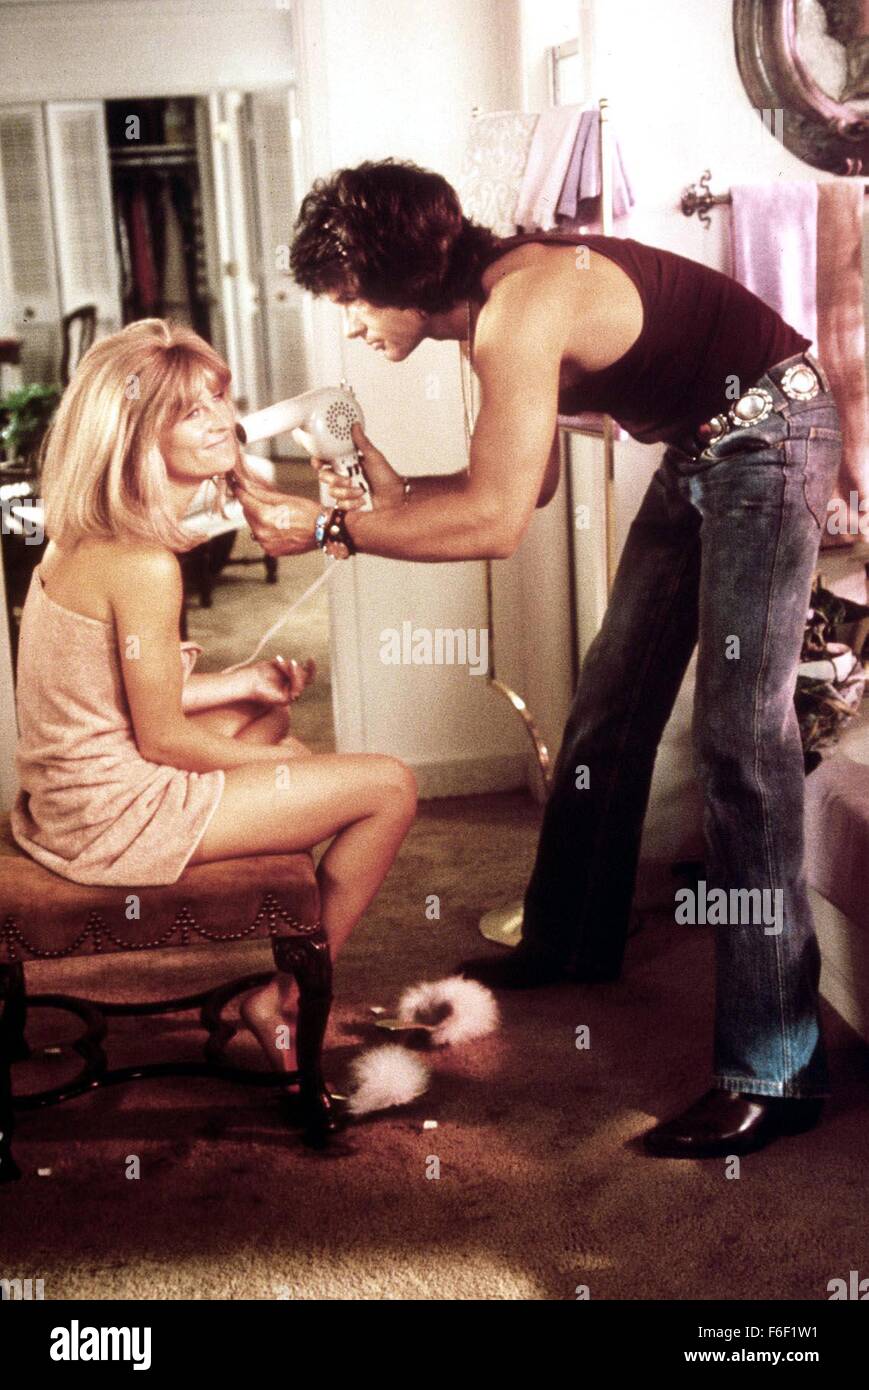 Dec 01, 1975; Hollywood, CA, USA; JULIE CHRISTIE (left) as Jackie Shawn and WARREN BEATTY as George Roundy in the romantic comedy ''Shampoo'' directed by Hal Ashby. Stock Photo